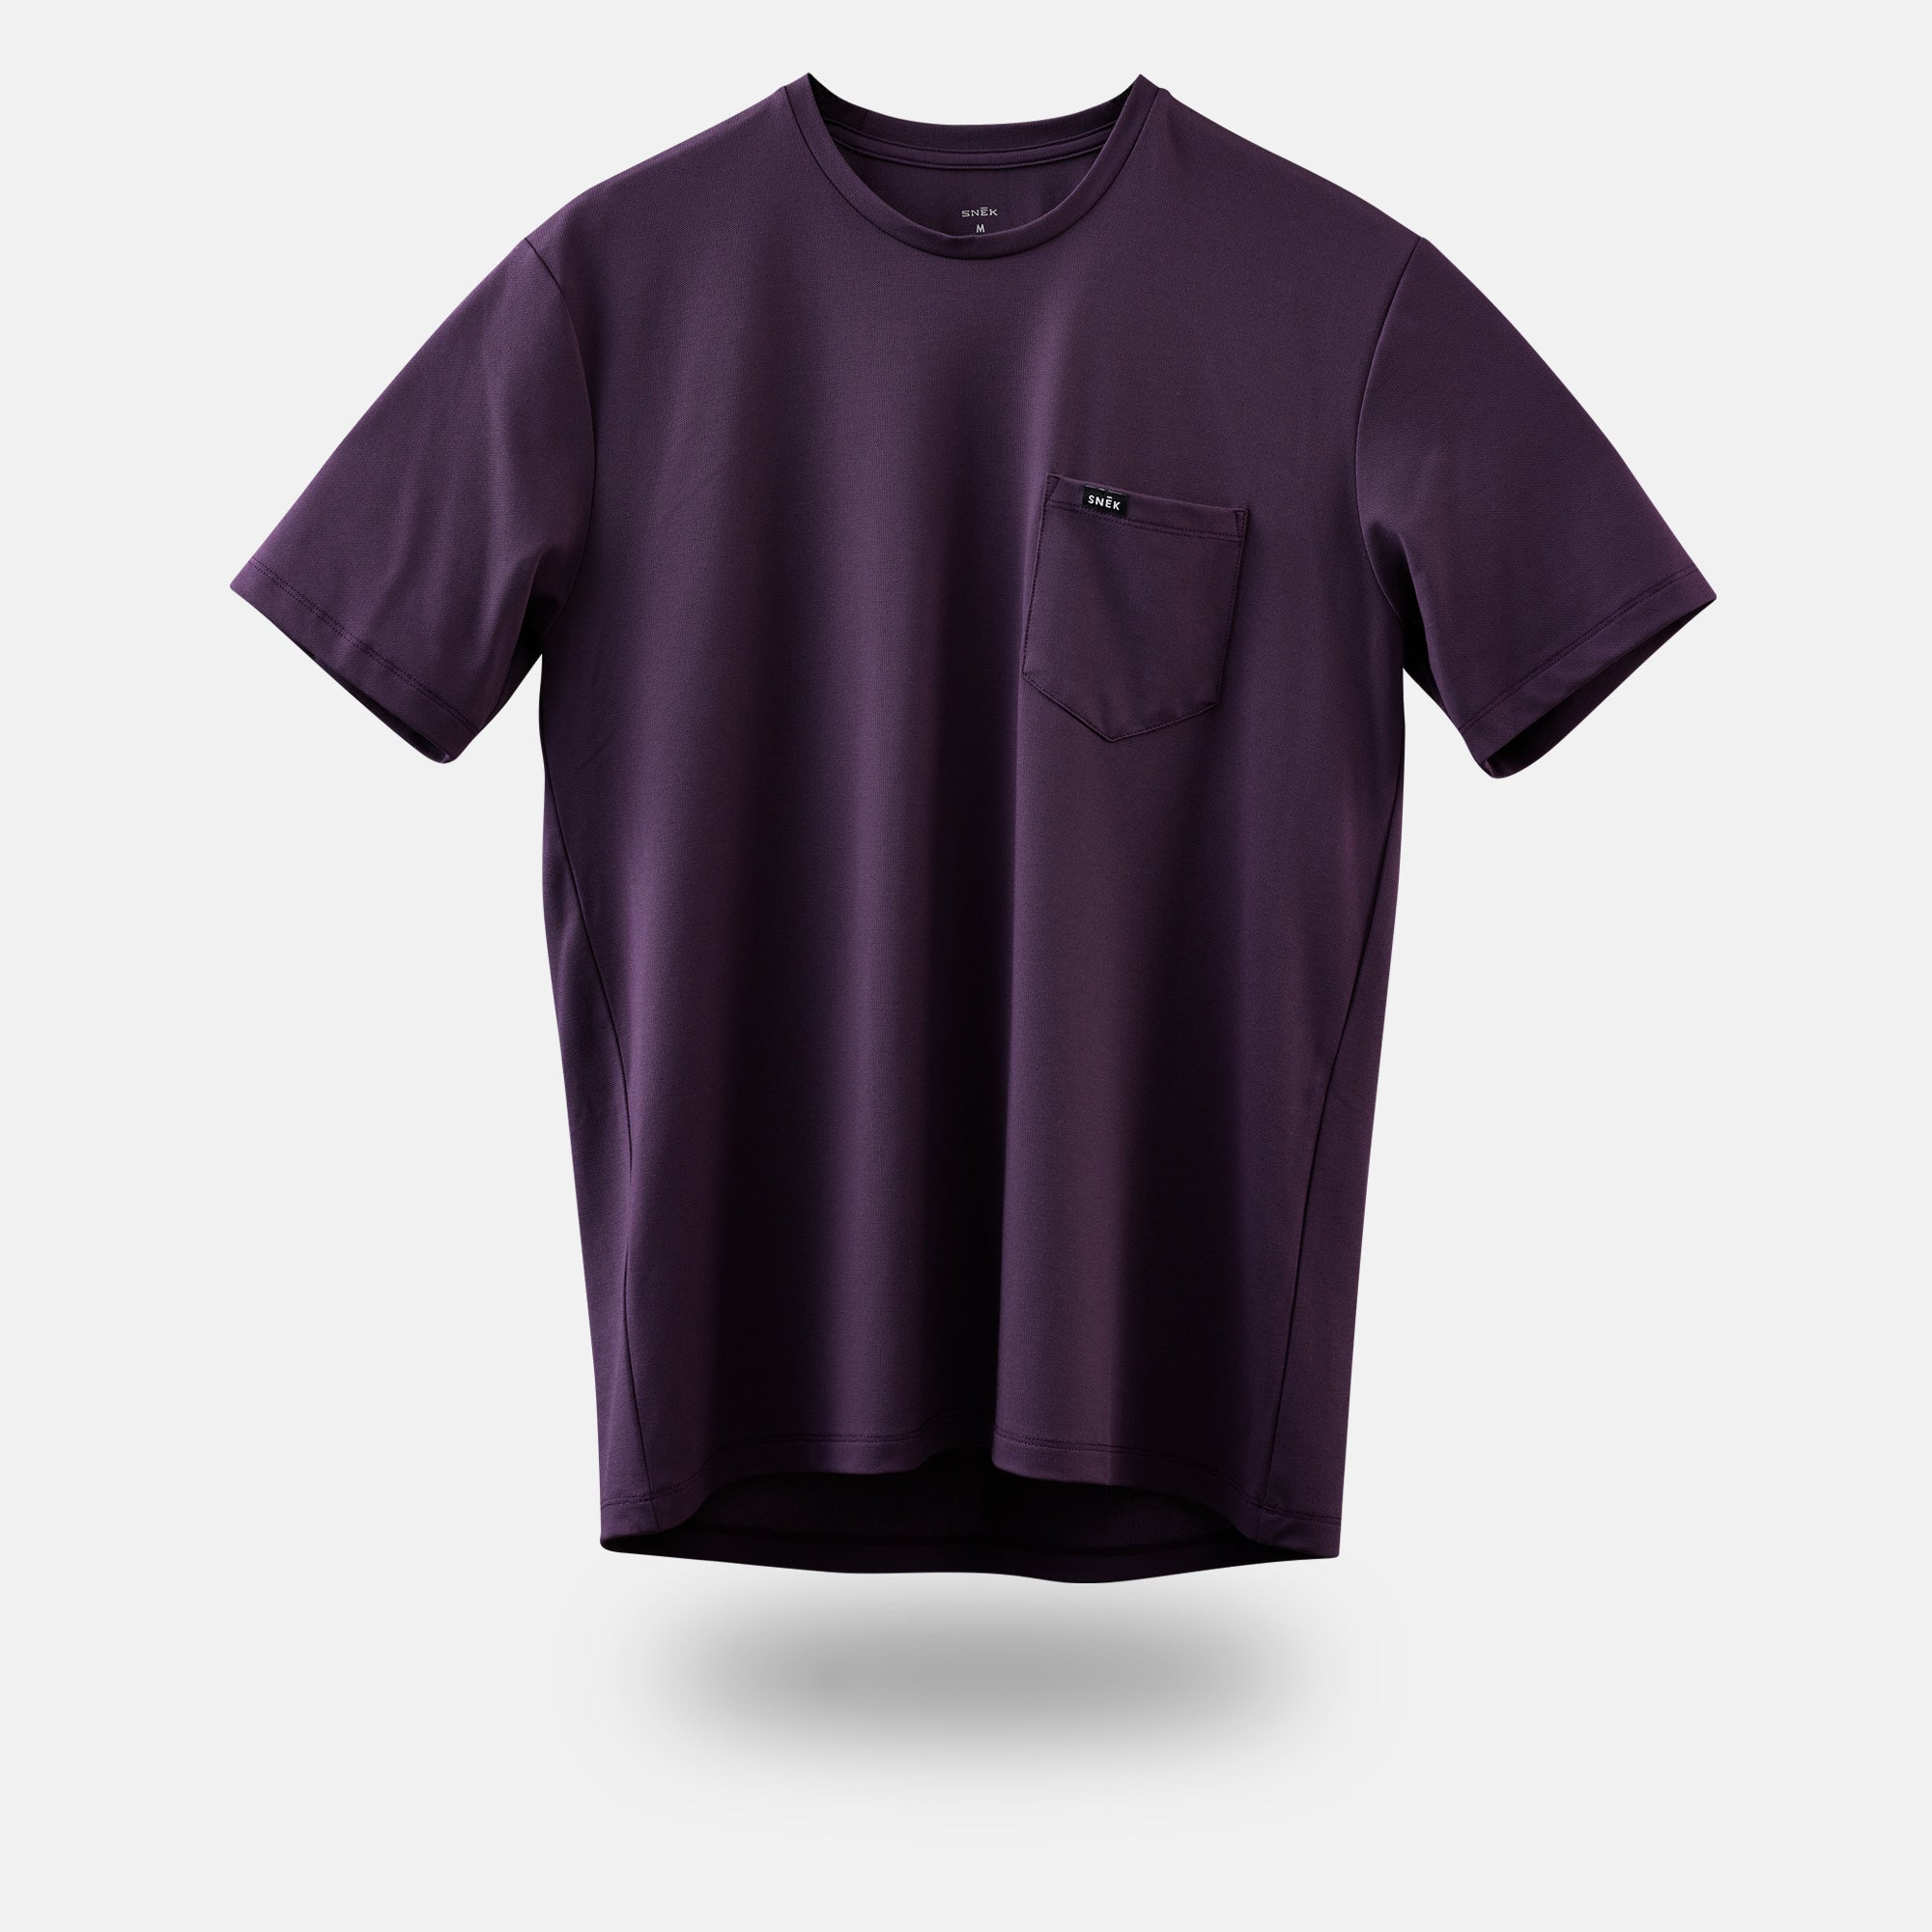 snek cycling purple dry creek pocket tee and jersey product shot for mountain biking and gravel riding